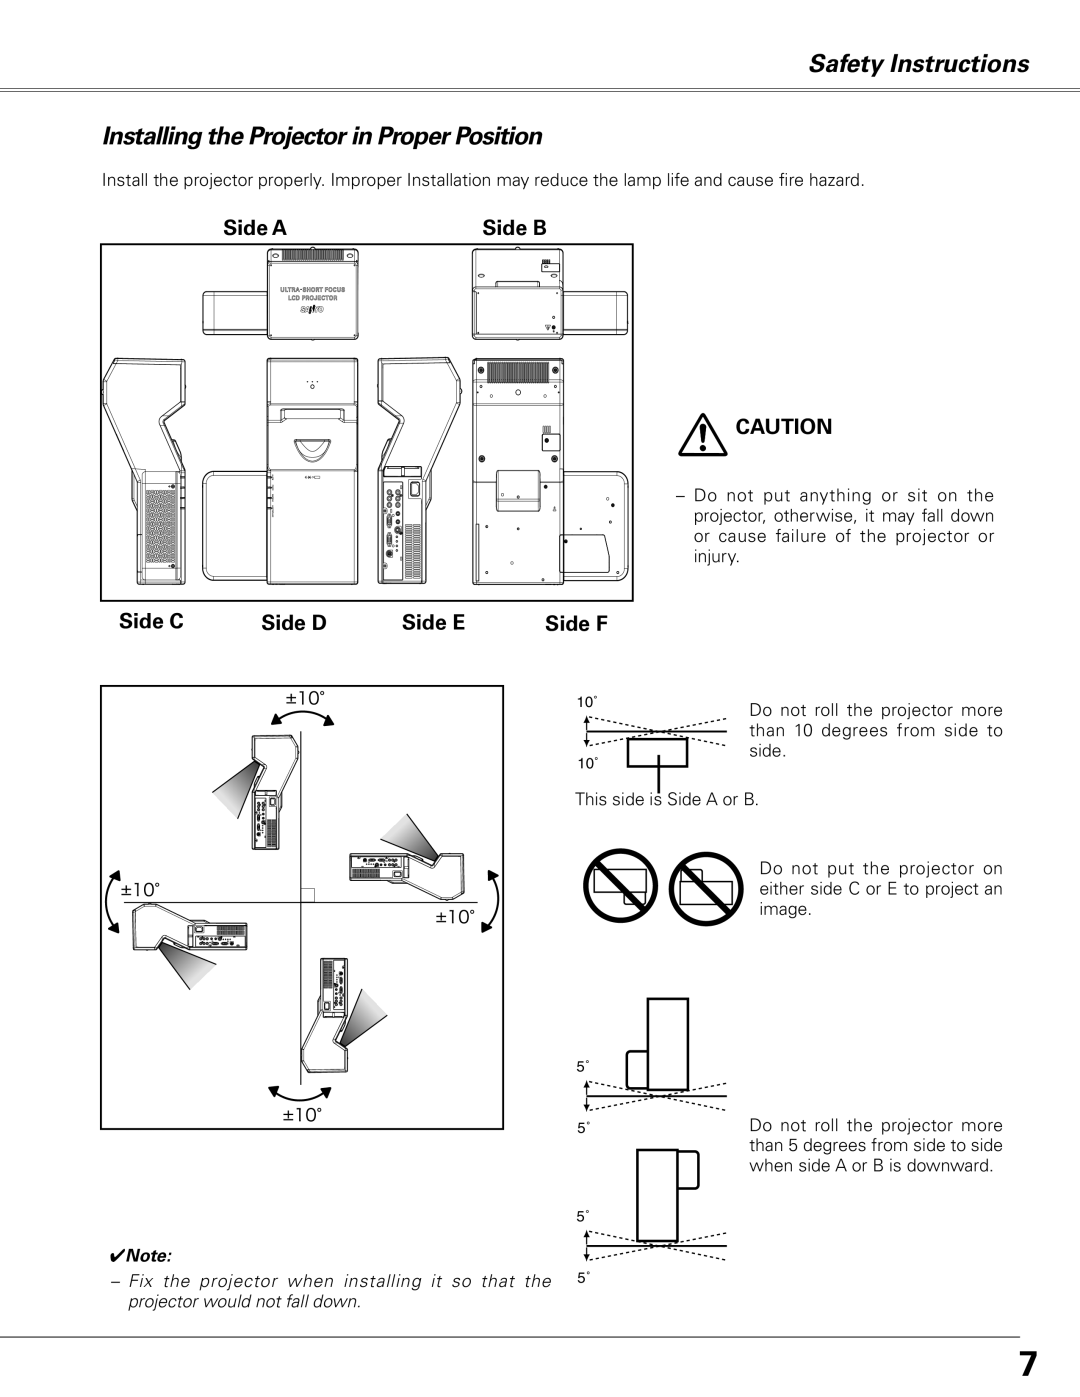 Sanyo PLC-XE50 Safety Instructions Installing the Projector in Proper Position, Side A, Side B, Side C, Side D, Side E 